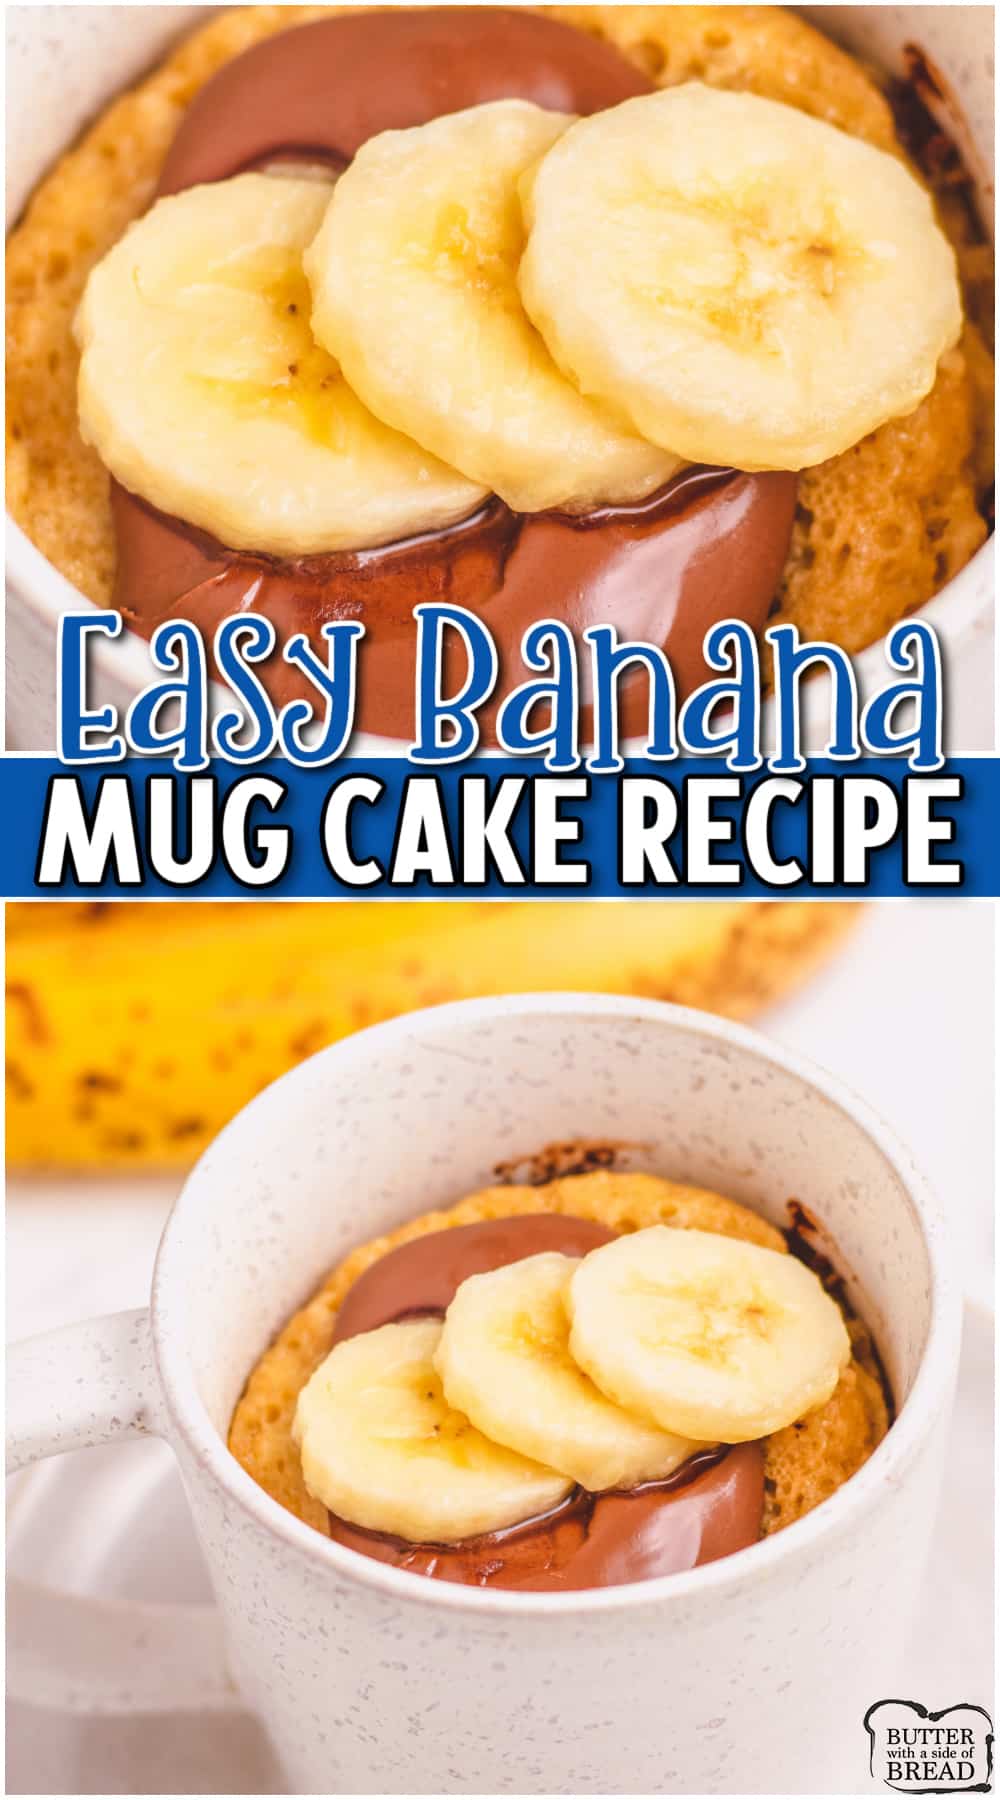 Chocolate Chip Banana Mug Cake is a delicious single-serving treat that's ready in less than 5 minutes! Chocolate chip mug cake packed with yummy banana flavor in every bite!